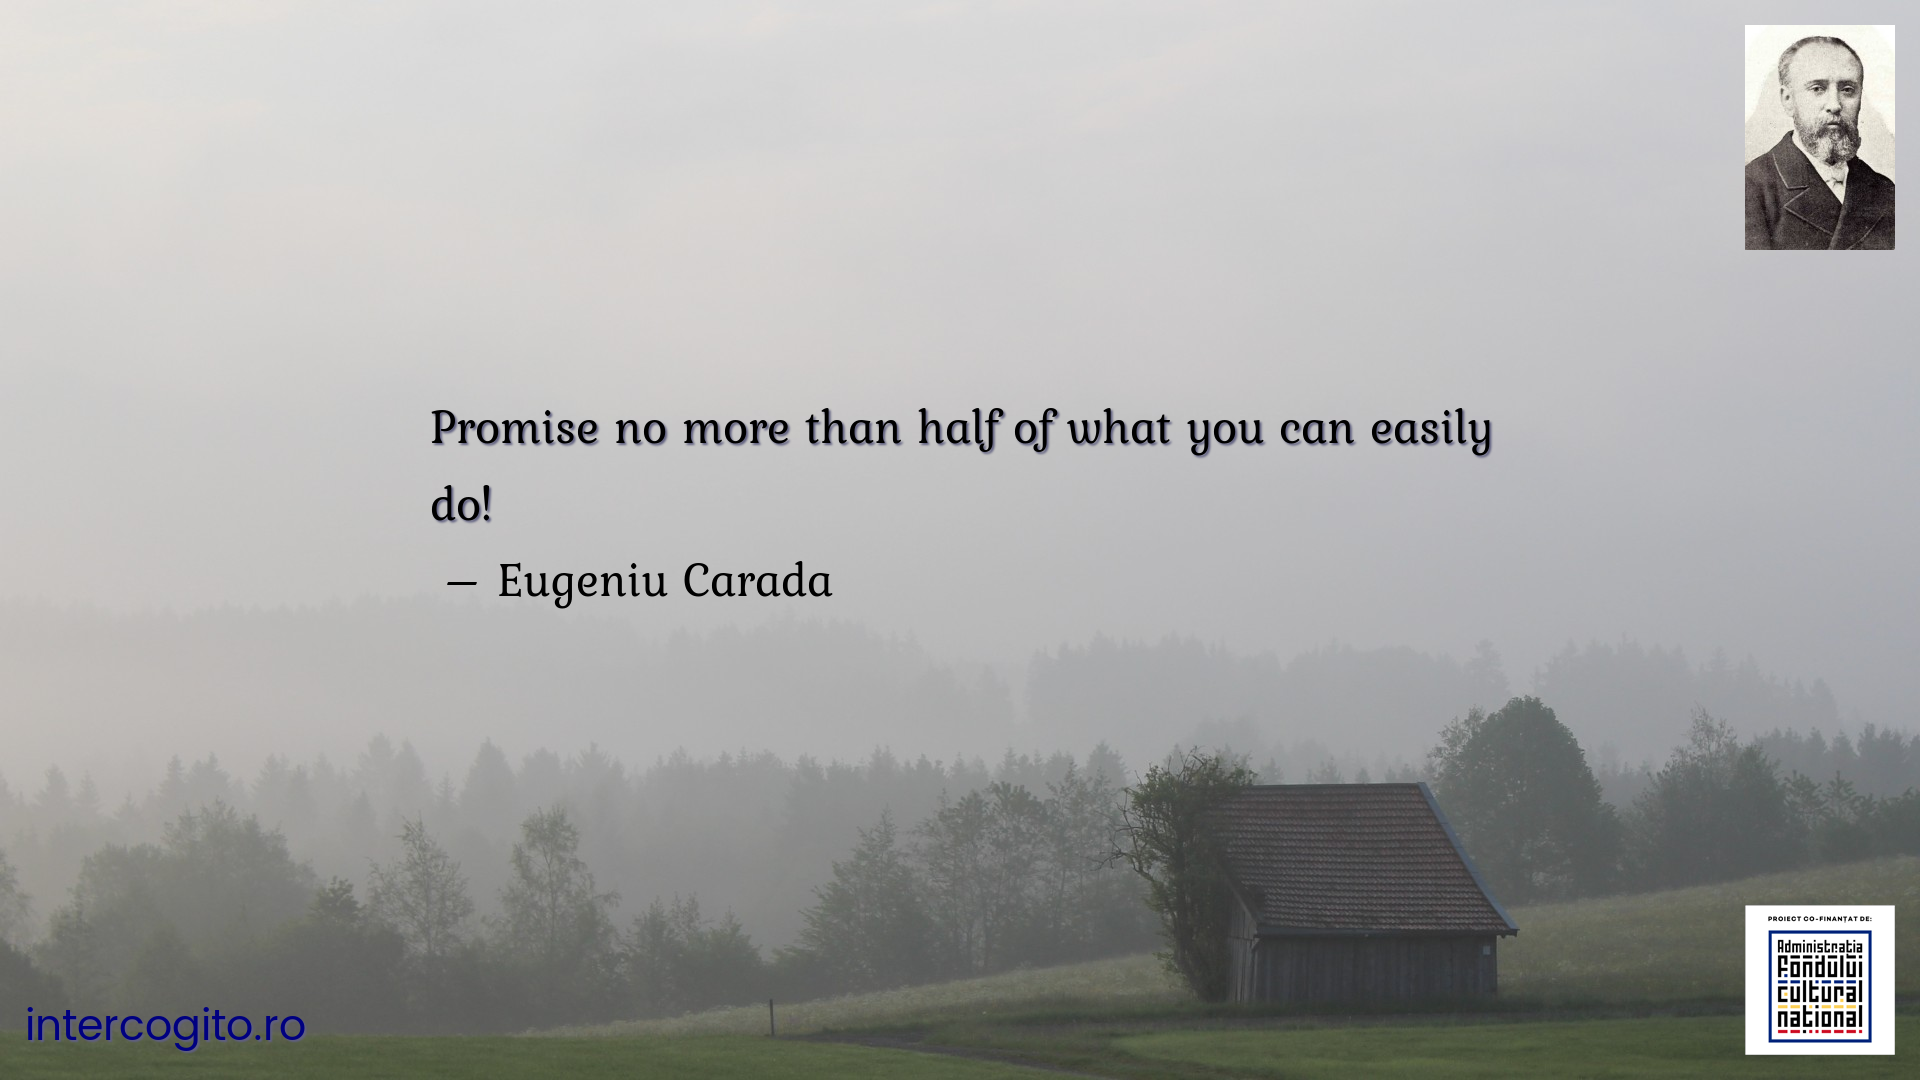 Promise no more than half of what you can easily do!